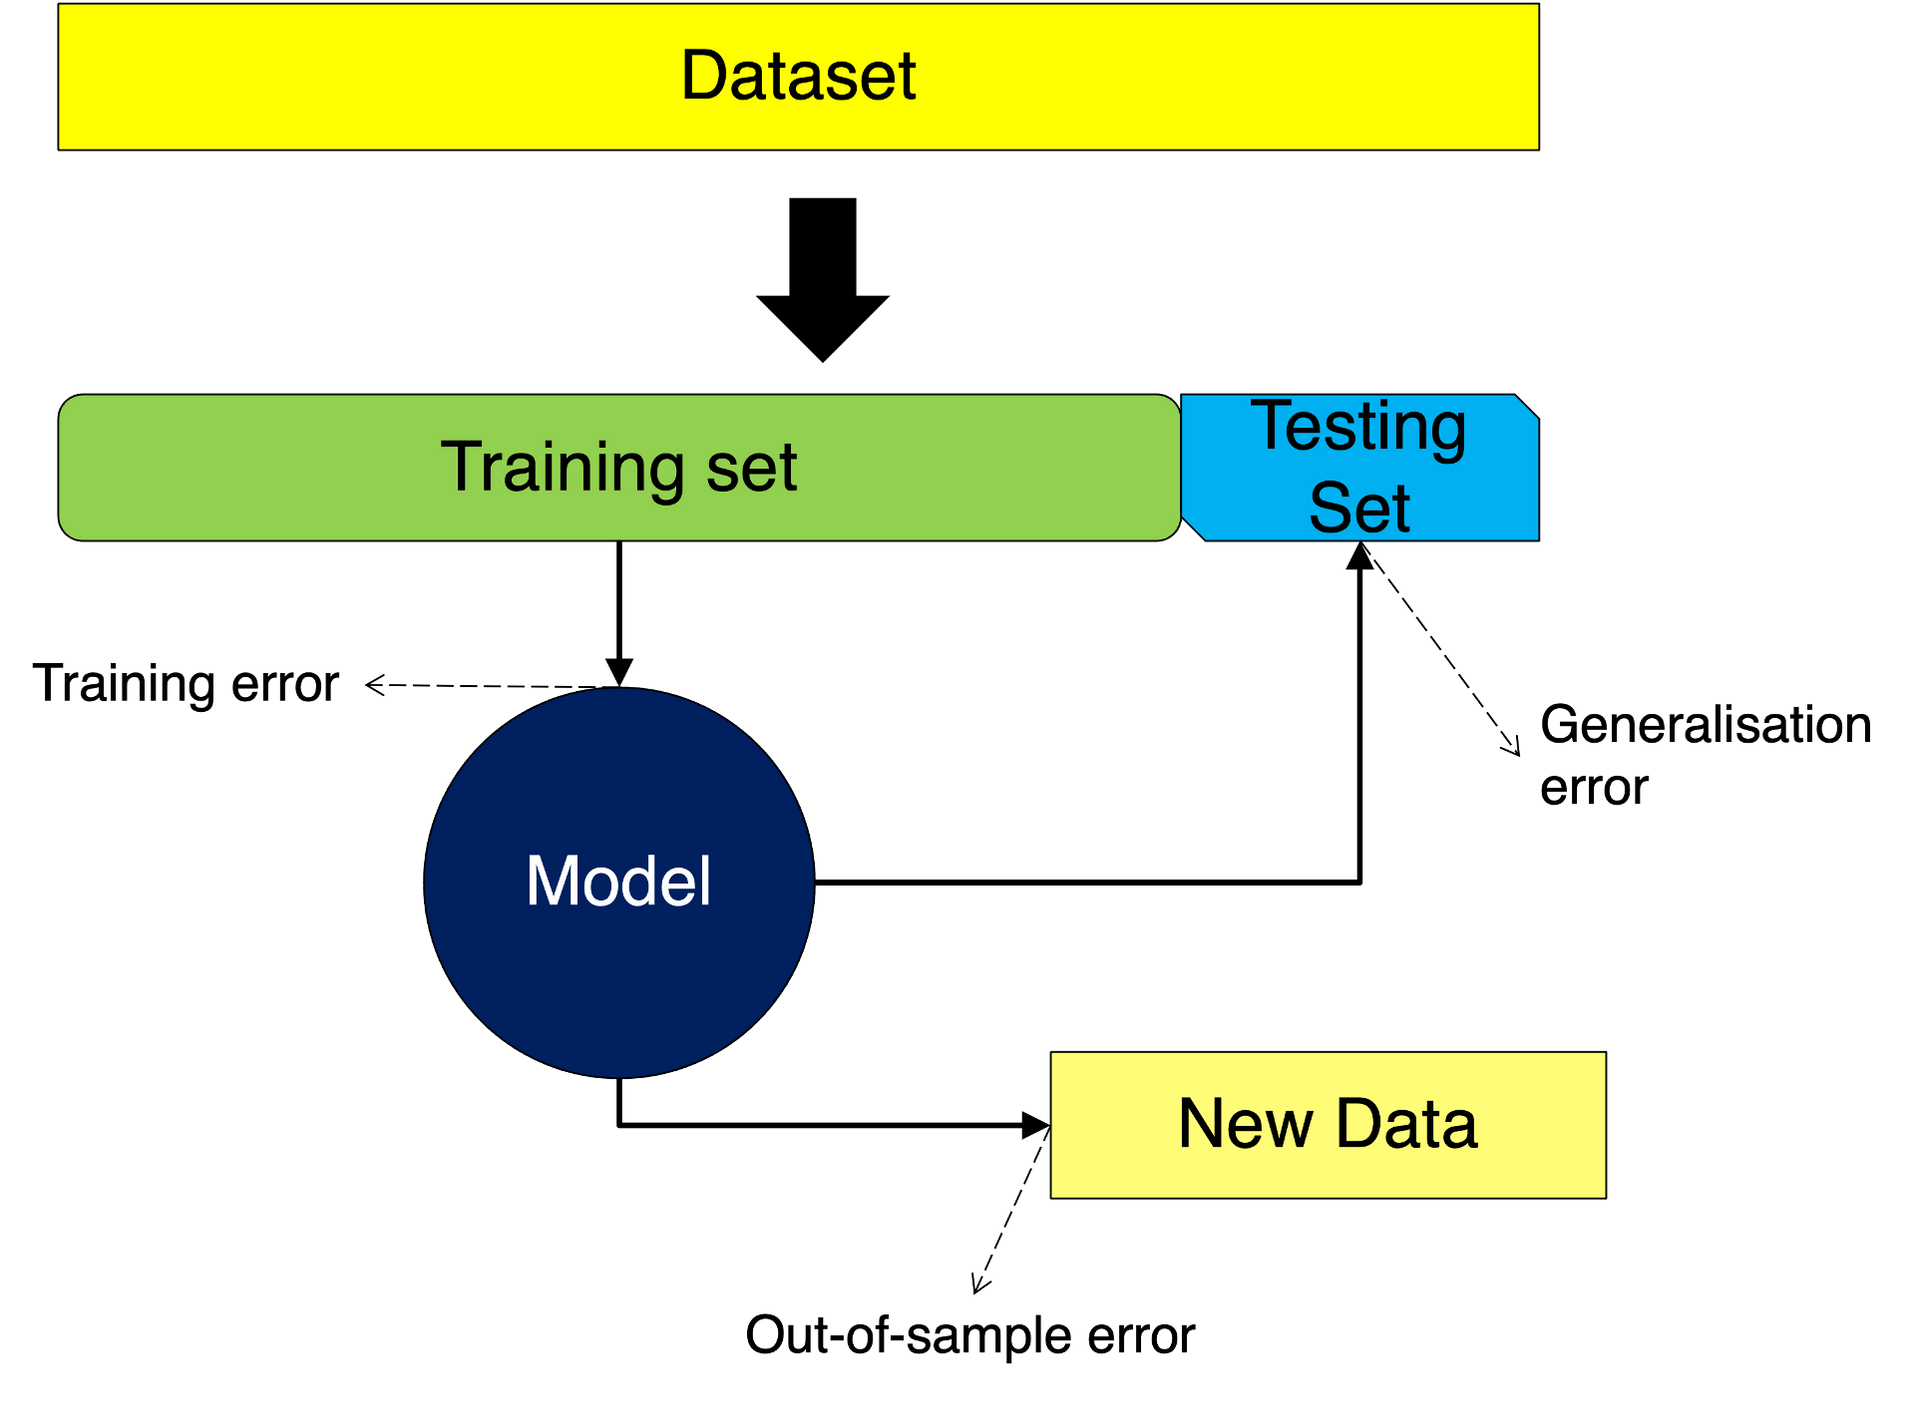 Diagram of data being partitioned into a training set and testing set for validation